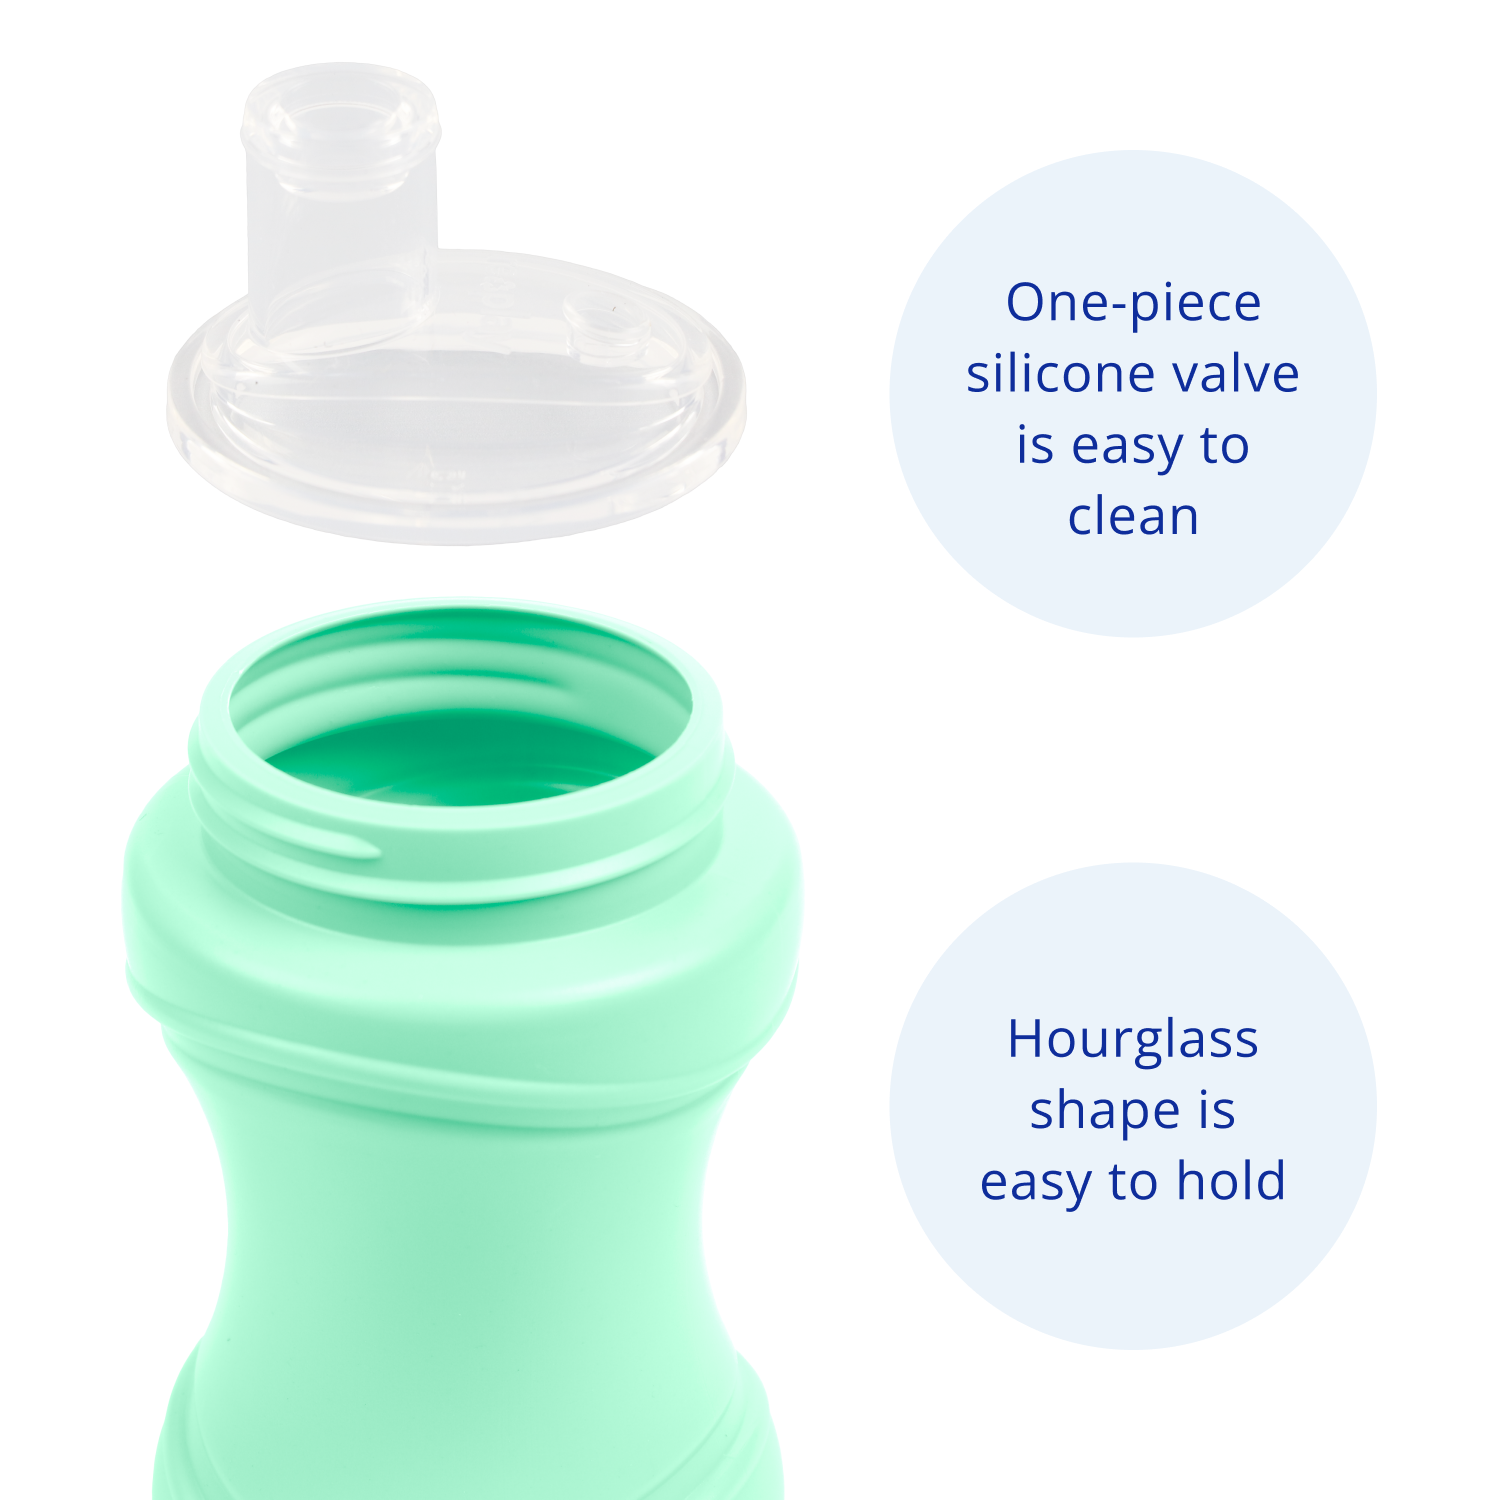 green sprouts Non-spill Sippy Cup, One-way valve for easy transition from  bottle